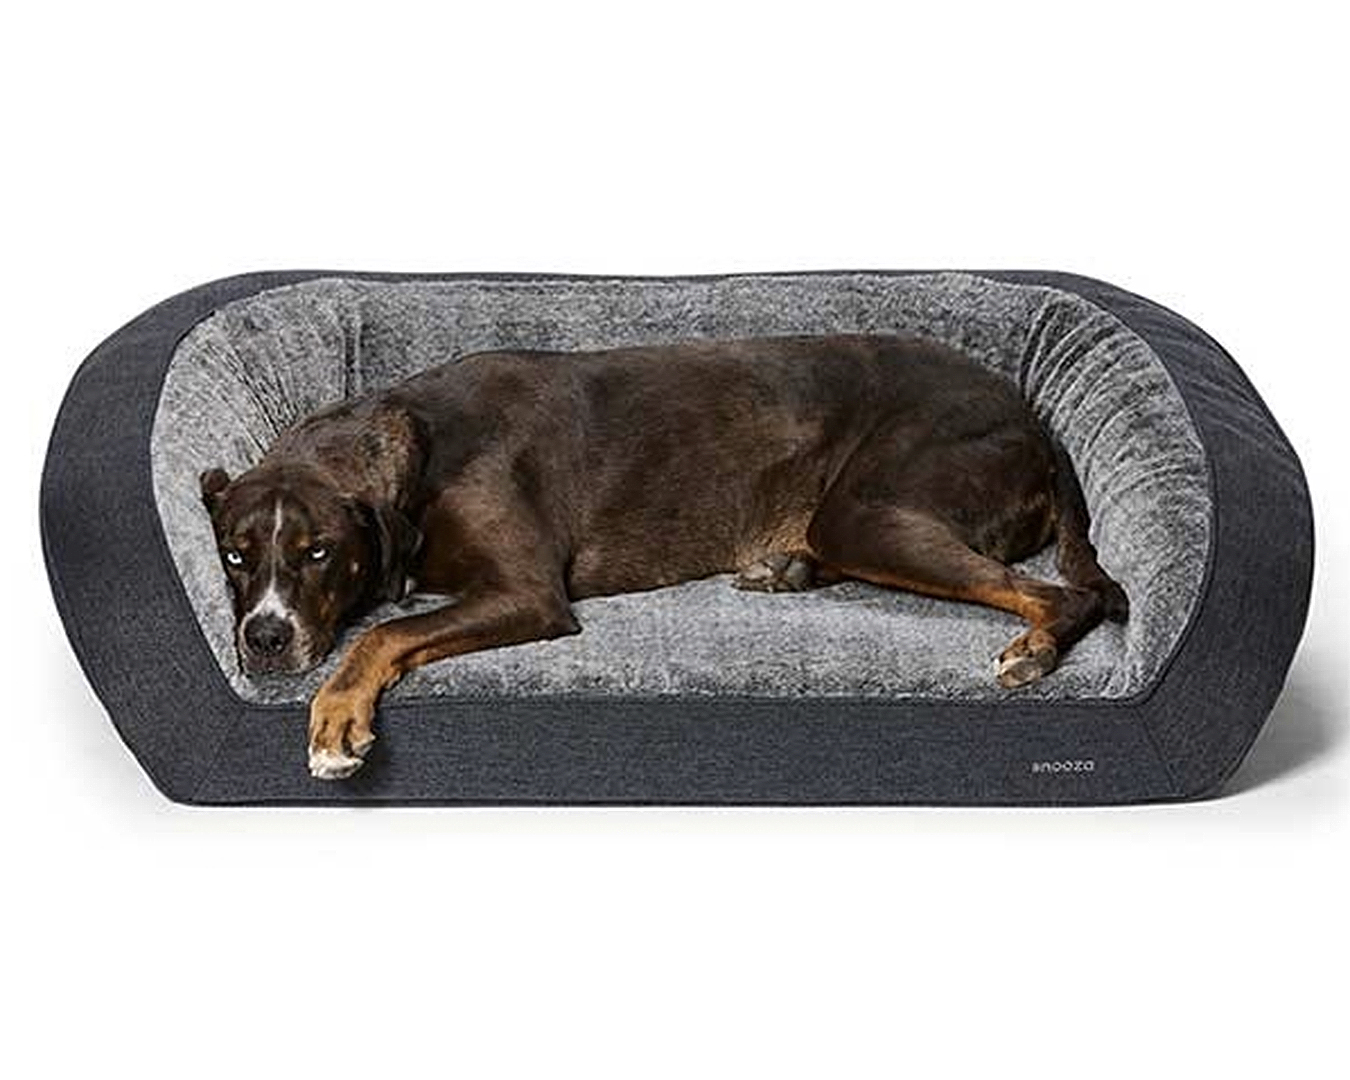 This Snooza dog sofa is the best orthopaedic dog bed for dogs with arthritis. 